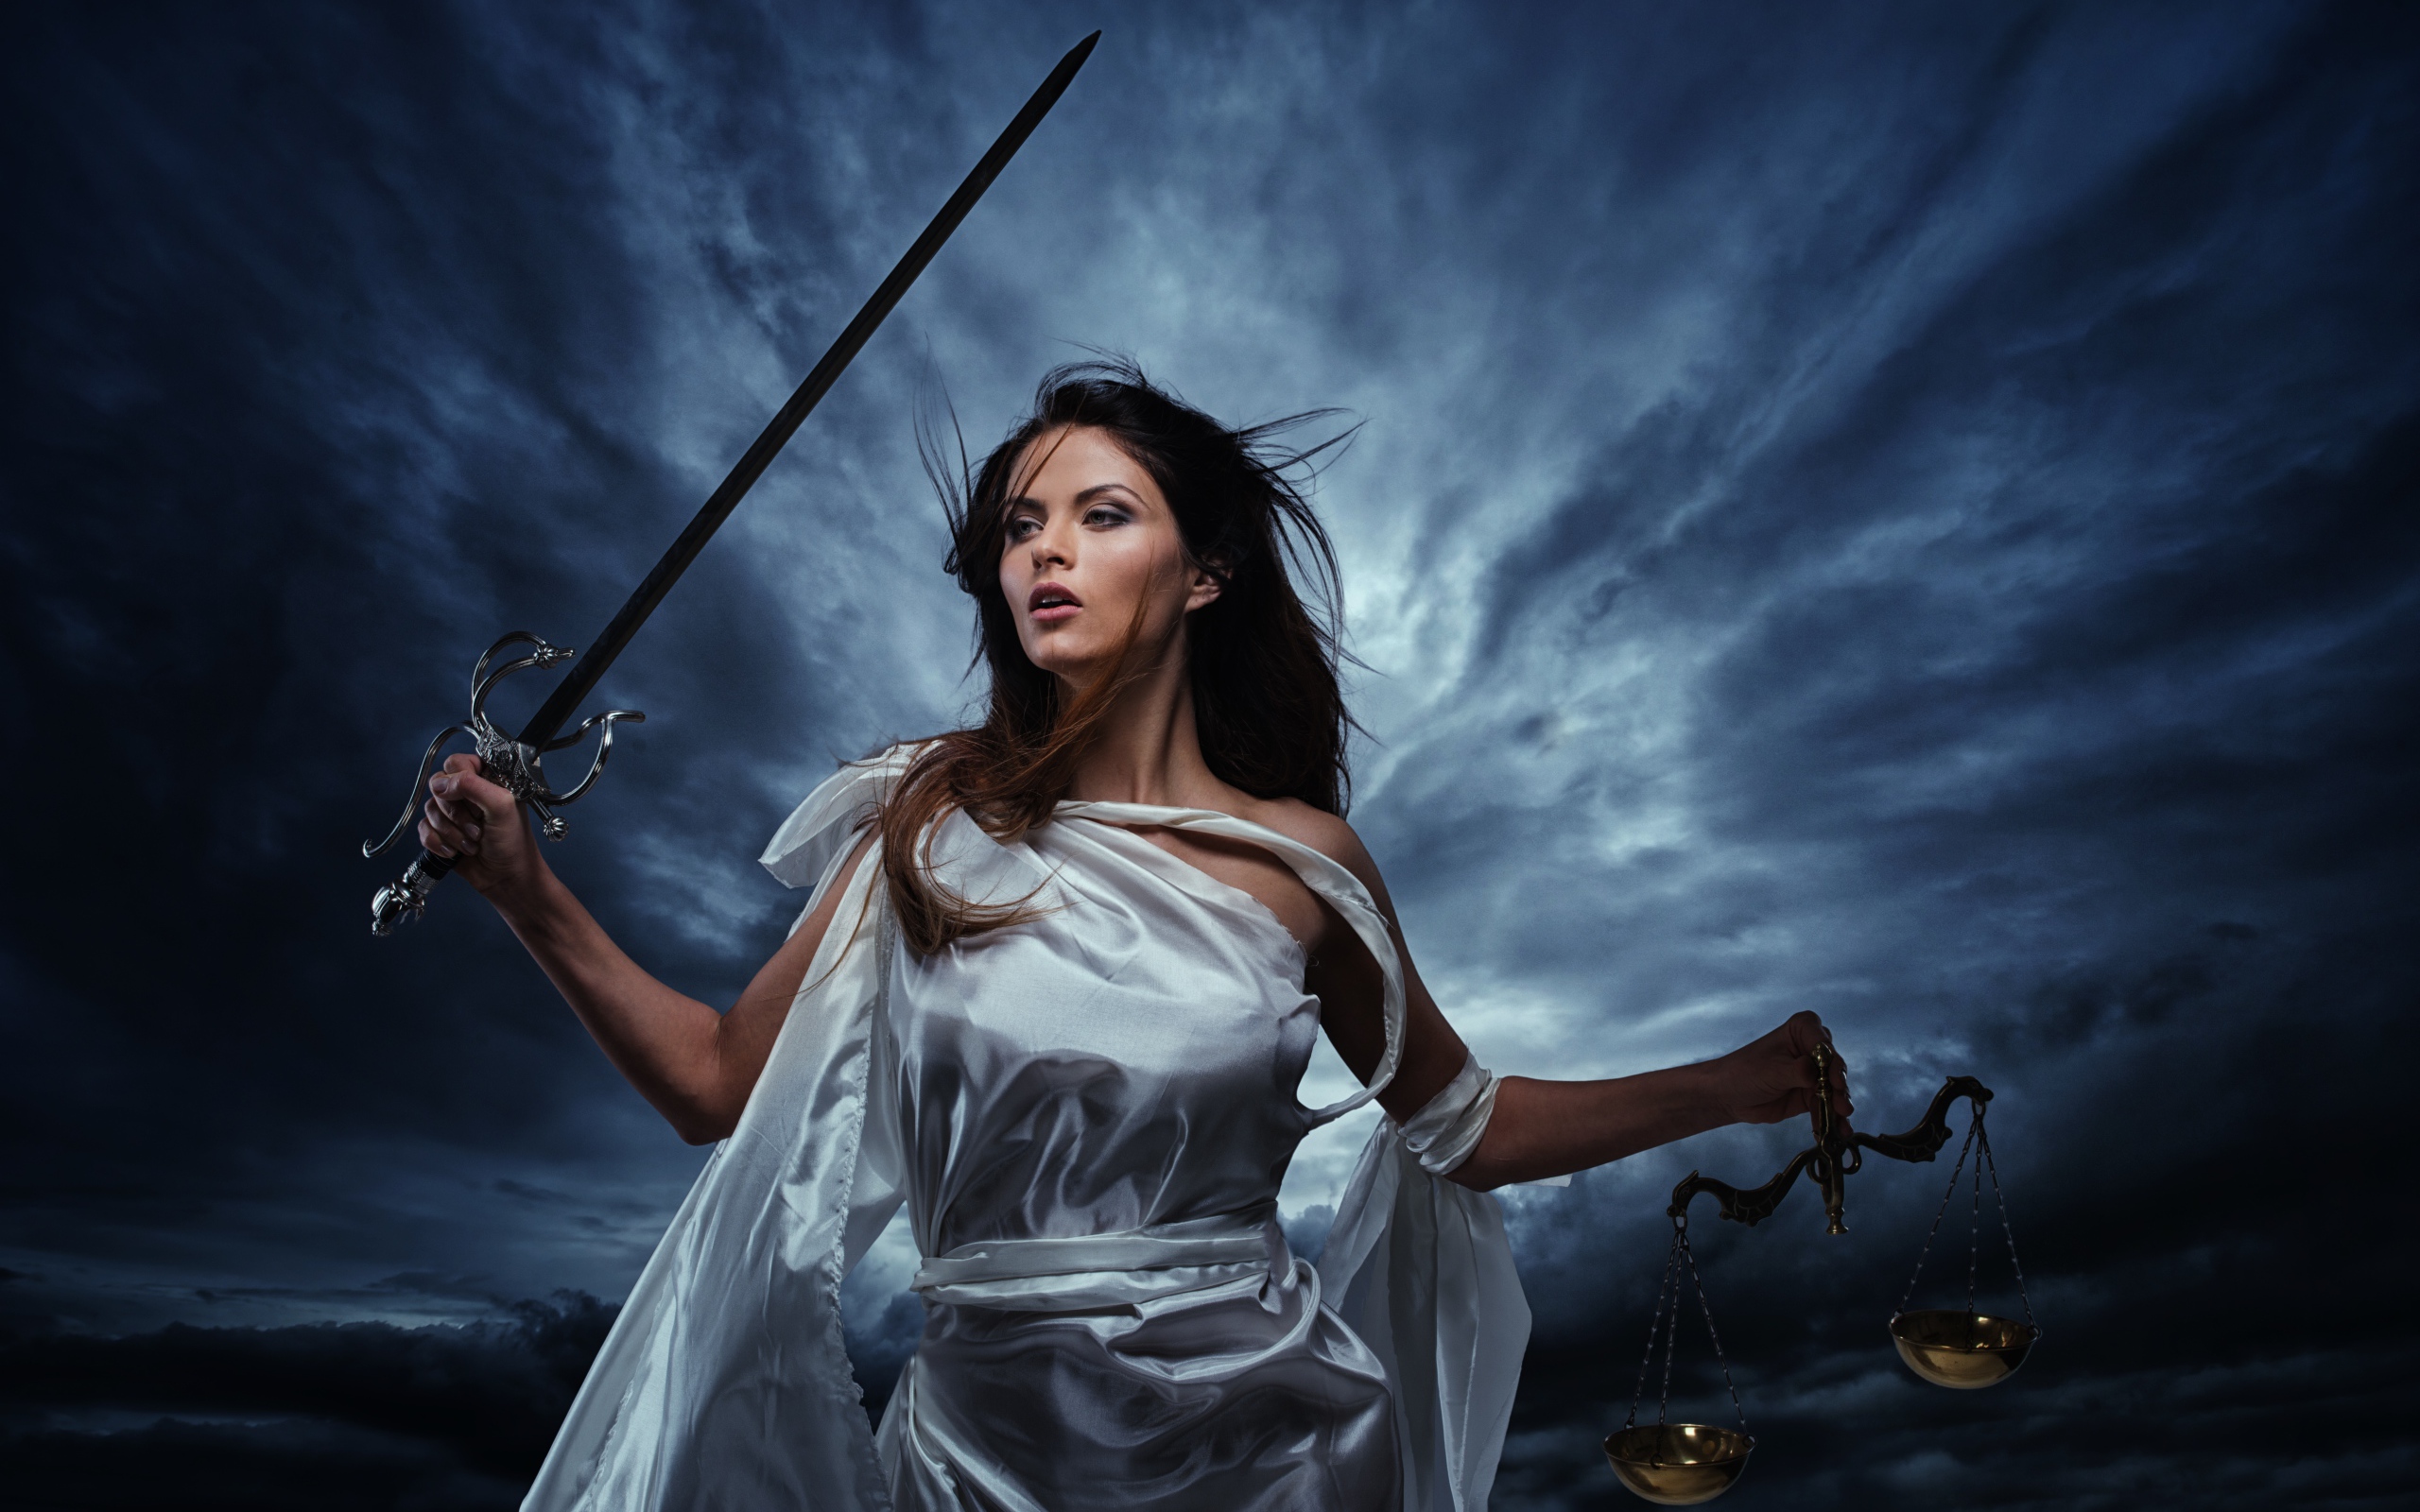 Girl with a sword and weights in the hands against the backdrop of a stormy sky, fantasy